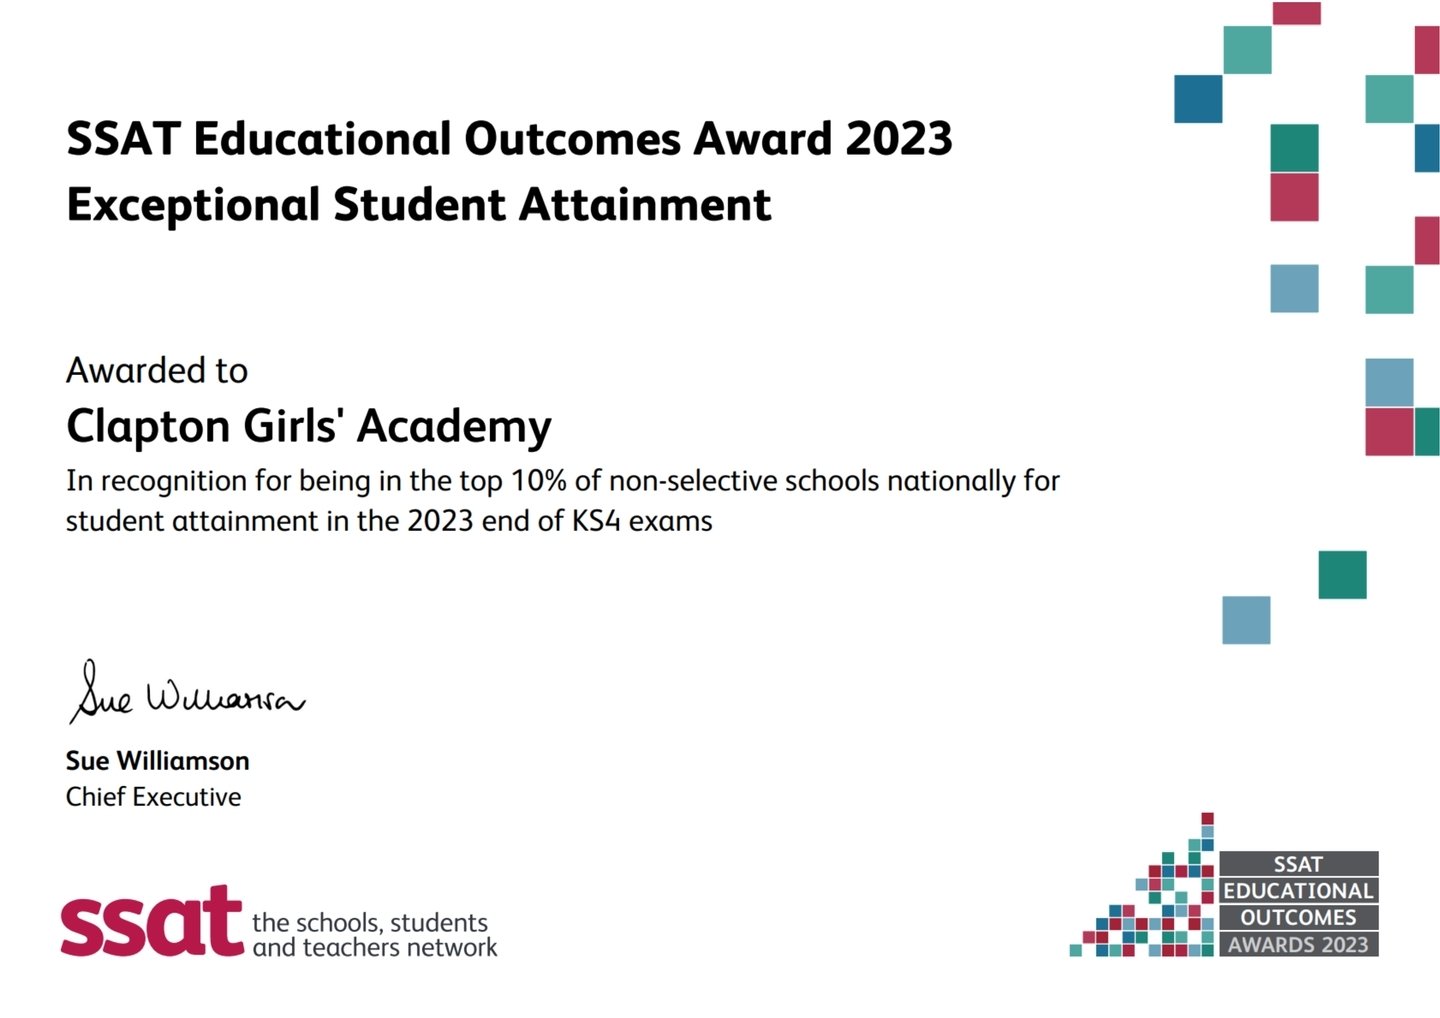 📢 CGA in the Top 10%

Sue Williamson, Chief Executive of SSAT said:
&ldquo;Congratulations to Clapton Girls' Academy on winning two SSAT Educational Outcomes Awards. This success is down to the superb learning and teaching, outstanding support and i